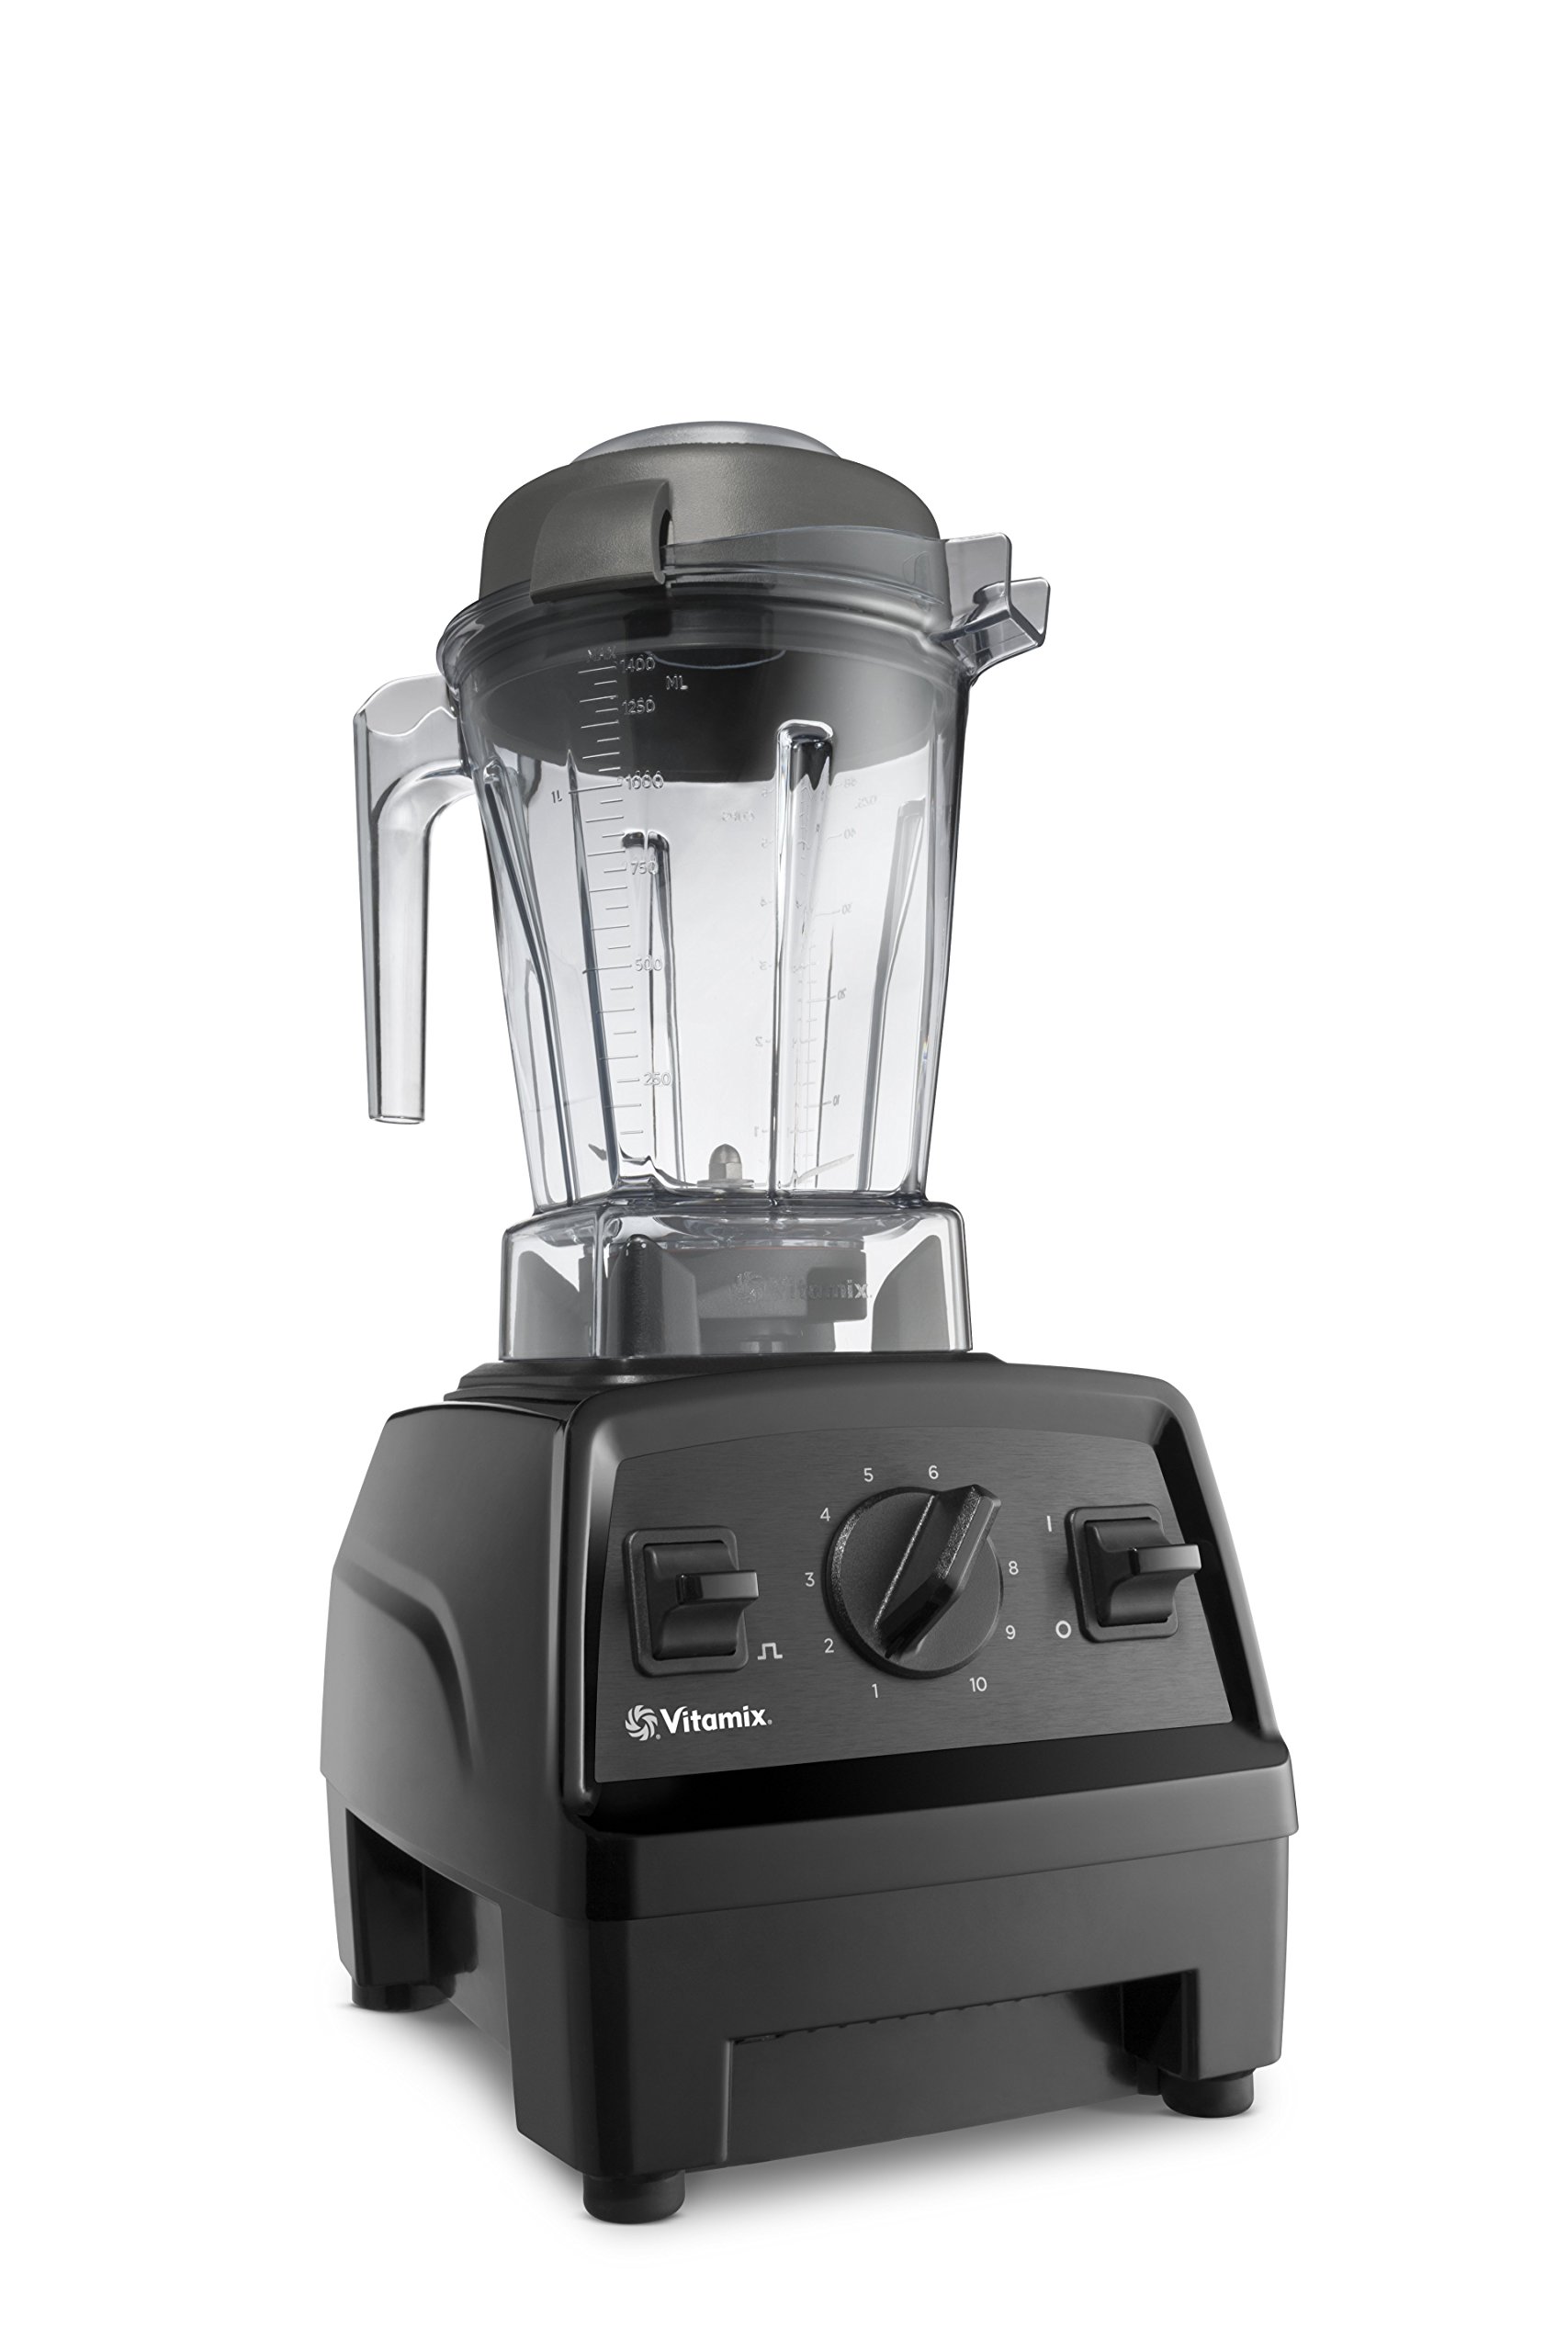 Vitamix E310 Explorer Blender with 48 Oz Container, Aircraft-Grade Stainless Steel Blades – Professional-Grade Powerful Motor Base, Variable Speed Control, Pulse Feature, Self-Cleaning